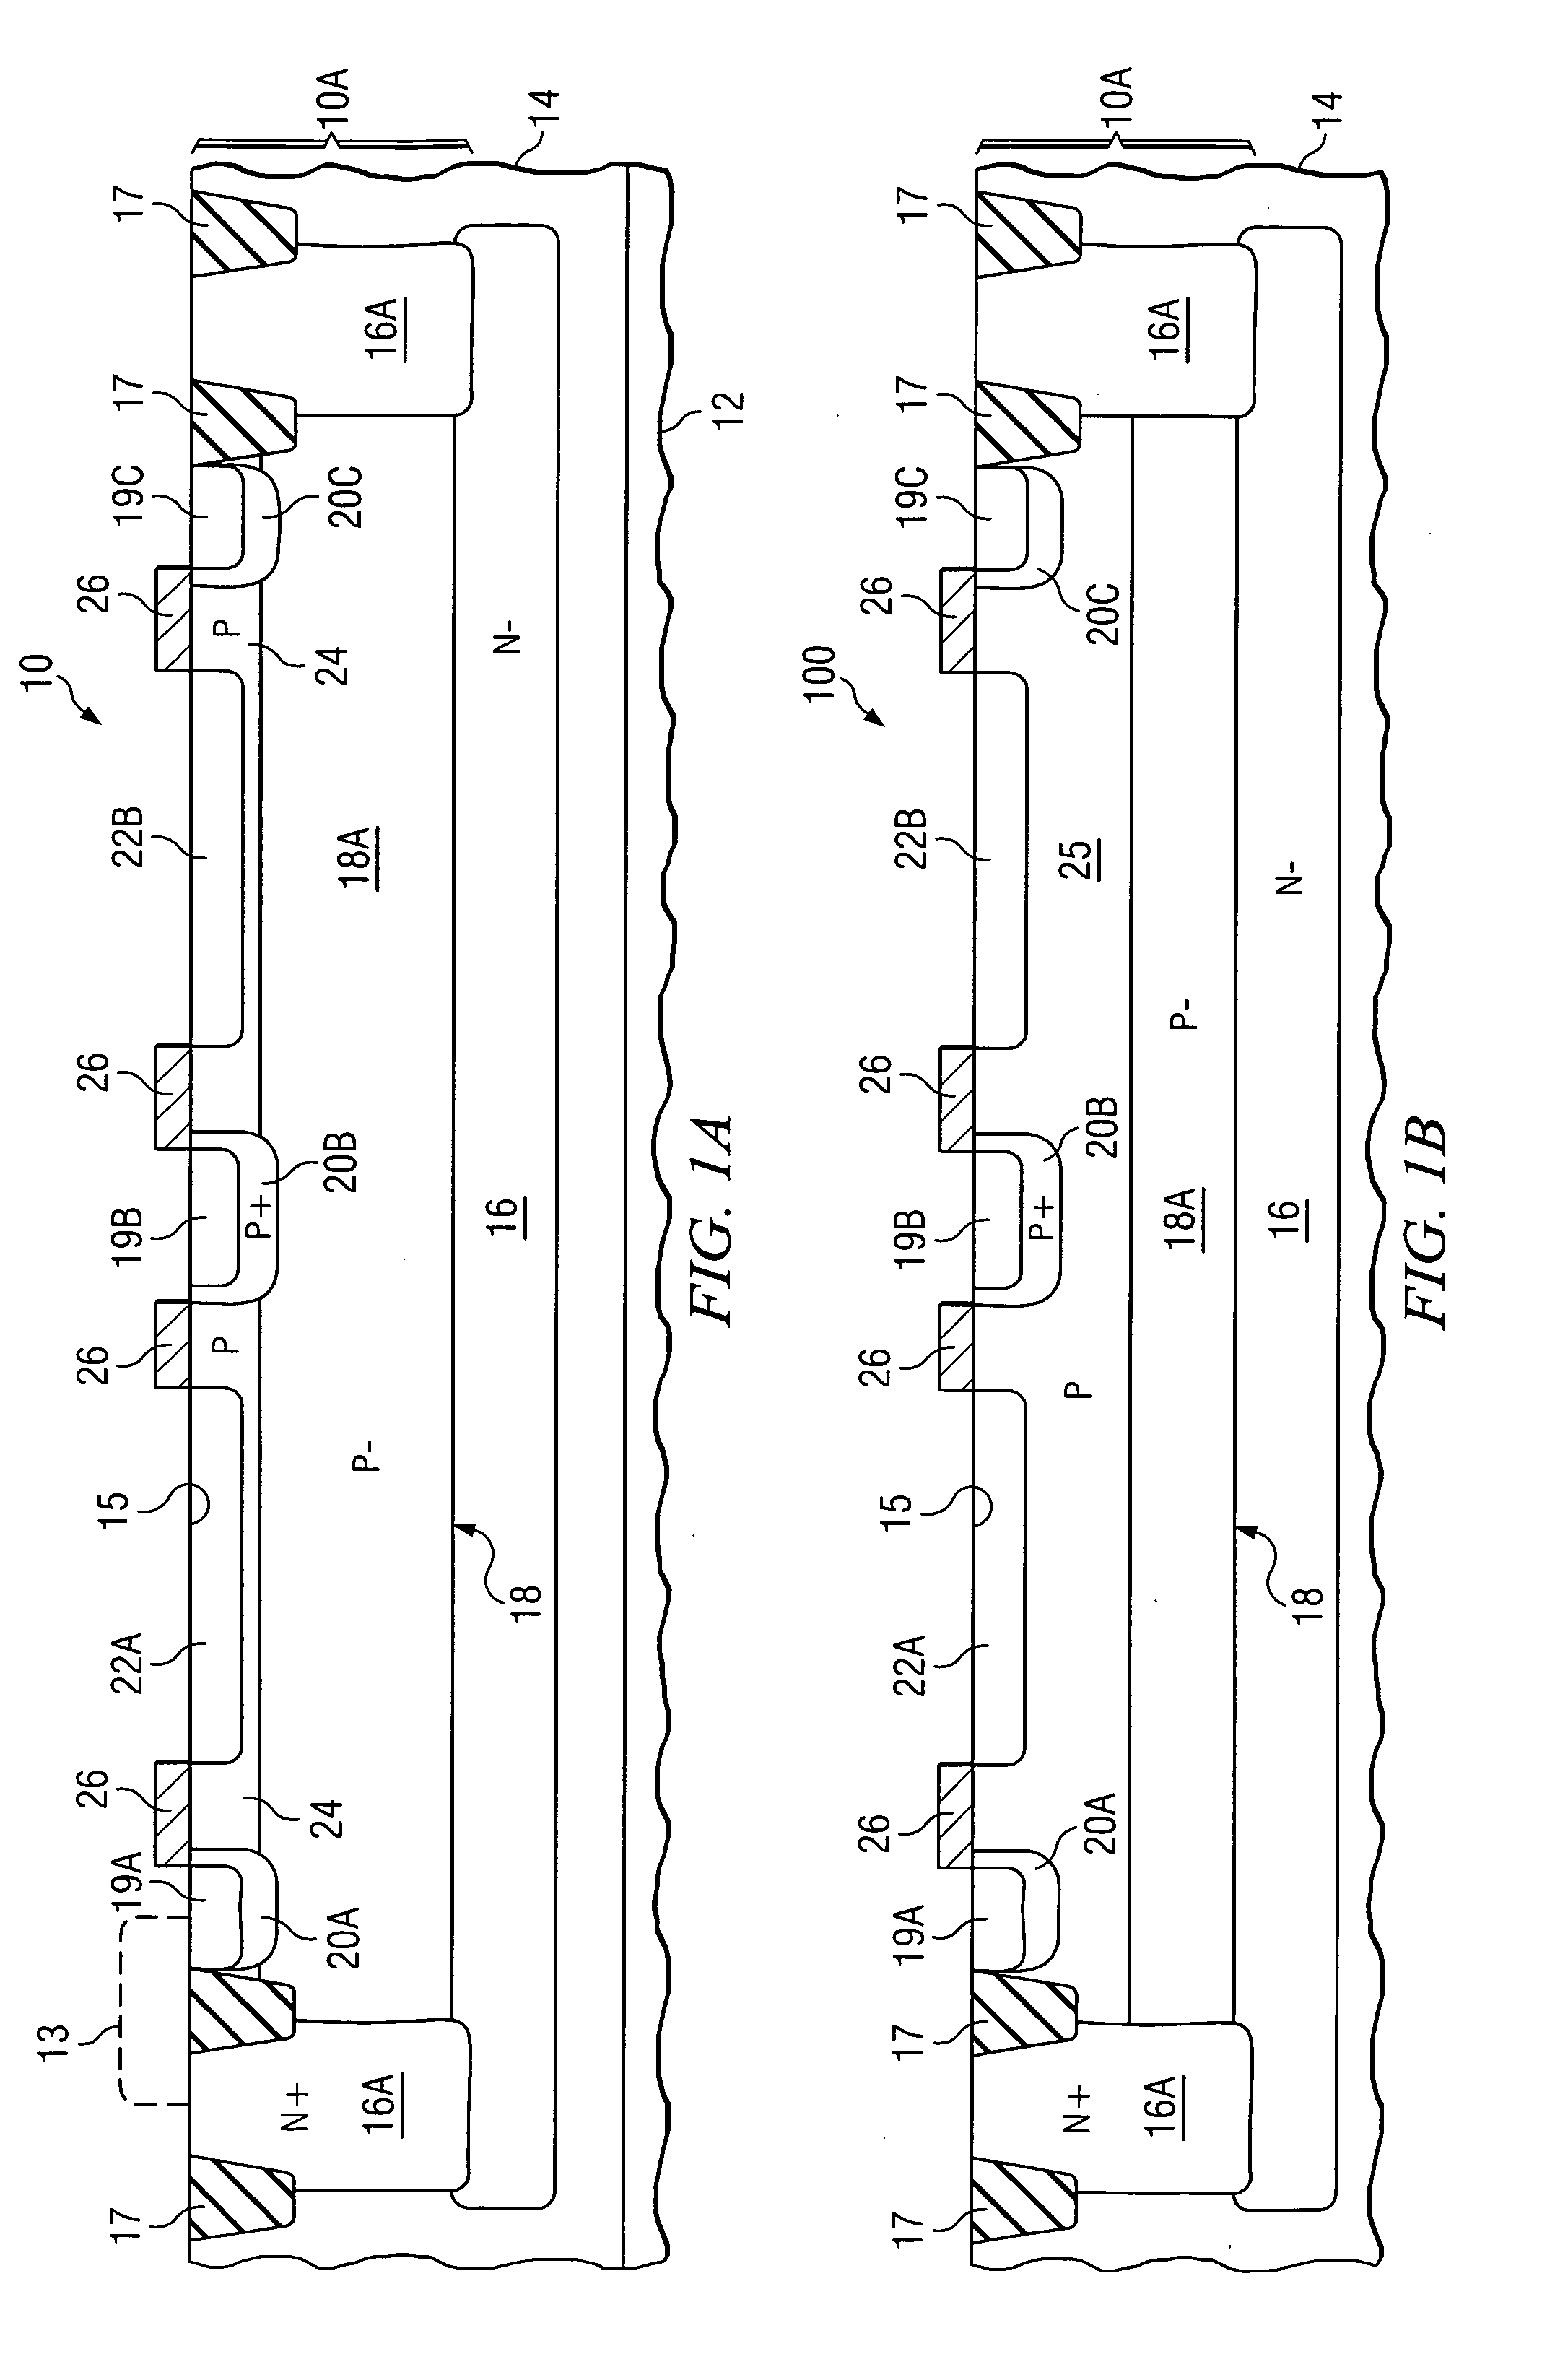 Method and Schottky diode structure for avoiding intrinsic NPM transistor operation